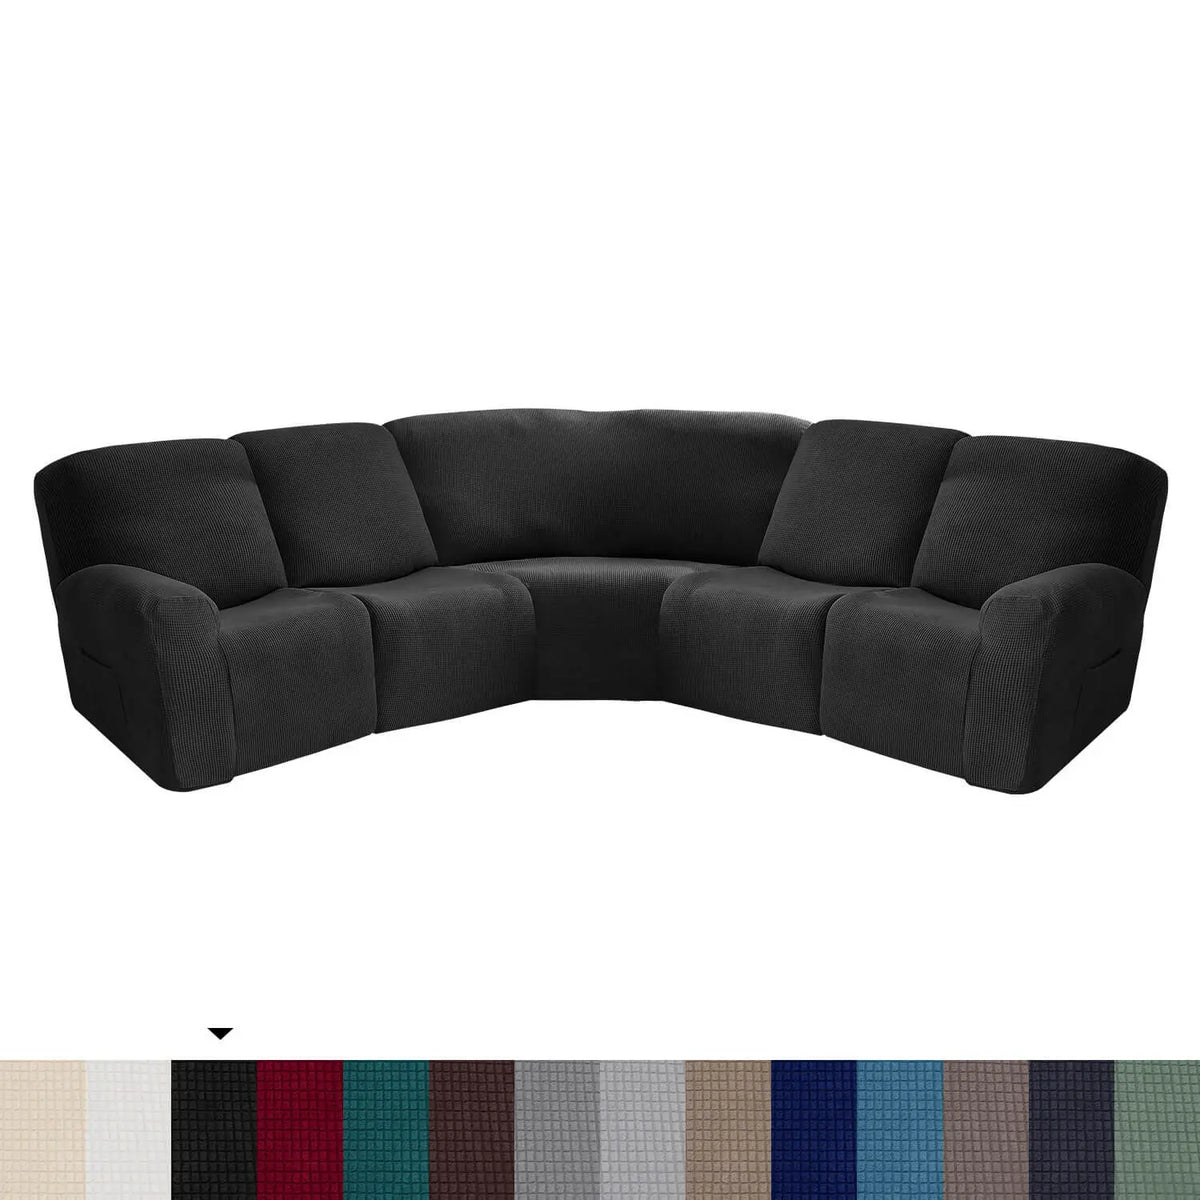 Crfatop L Shape Sectional Recliner Sofa Covers Corner Couch Covers Black